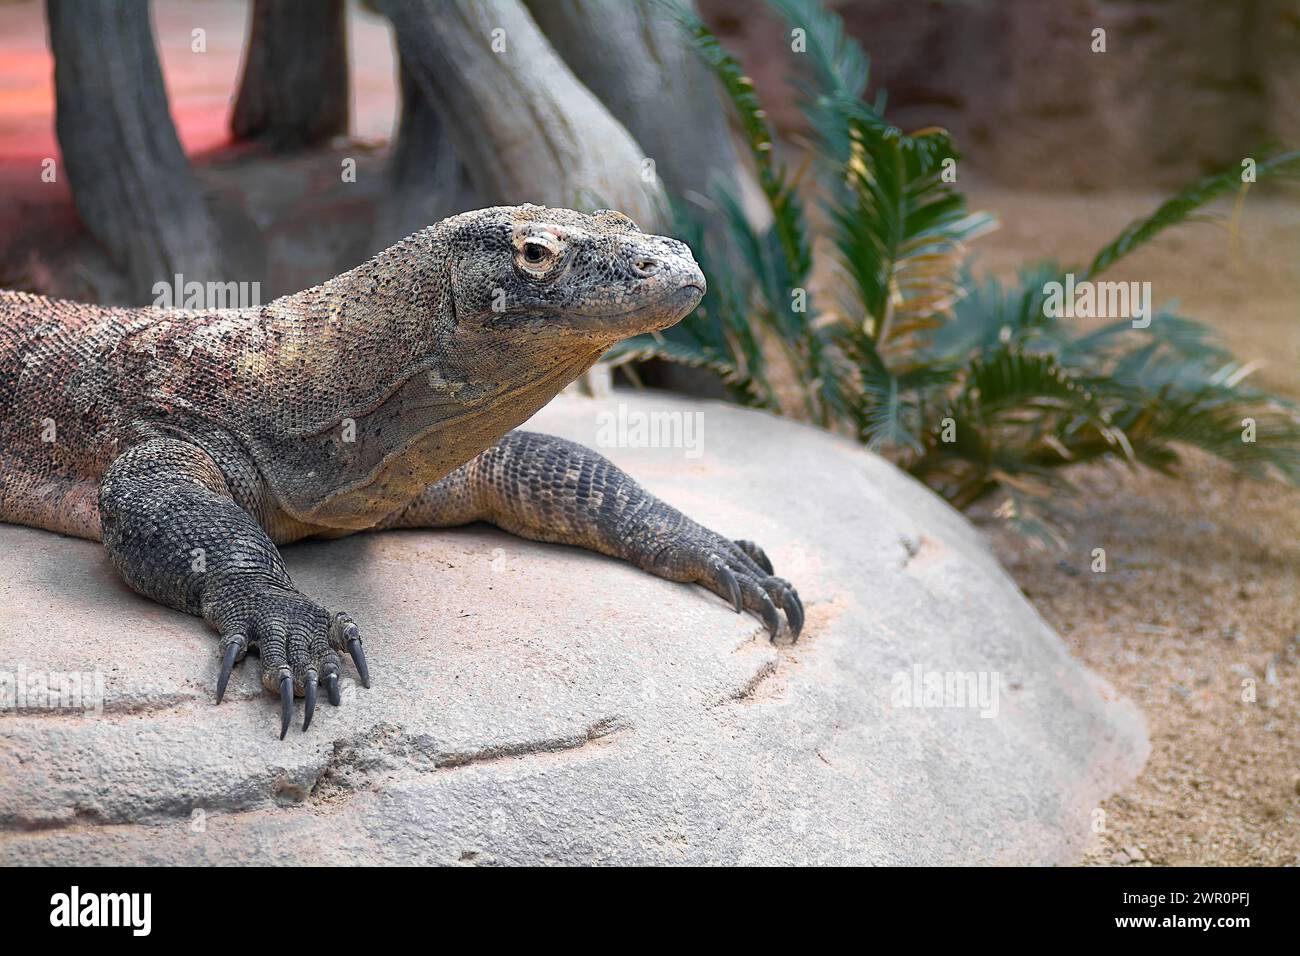 Relaxed Komodo dragon, showing its rough and scaly skin, perched on a rock with vegetation in the background. Stock Photo